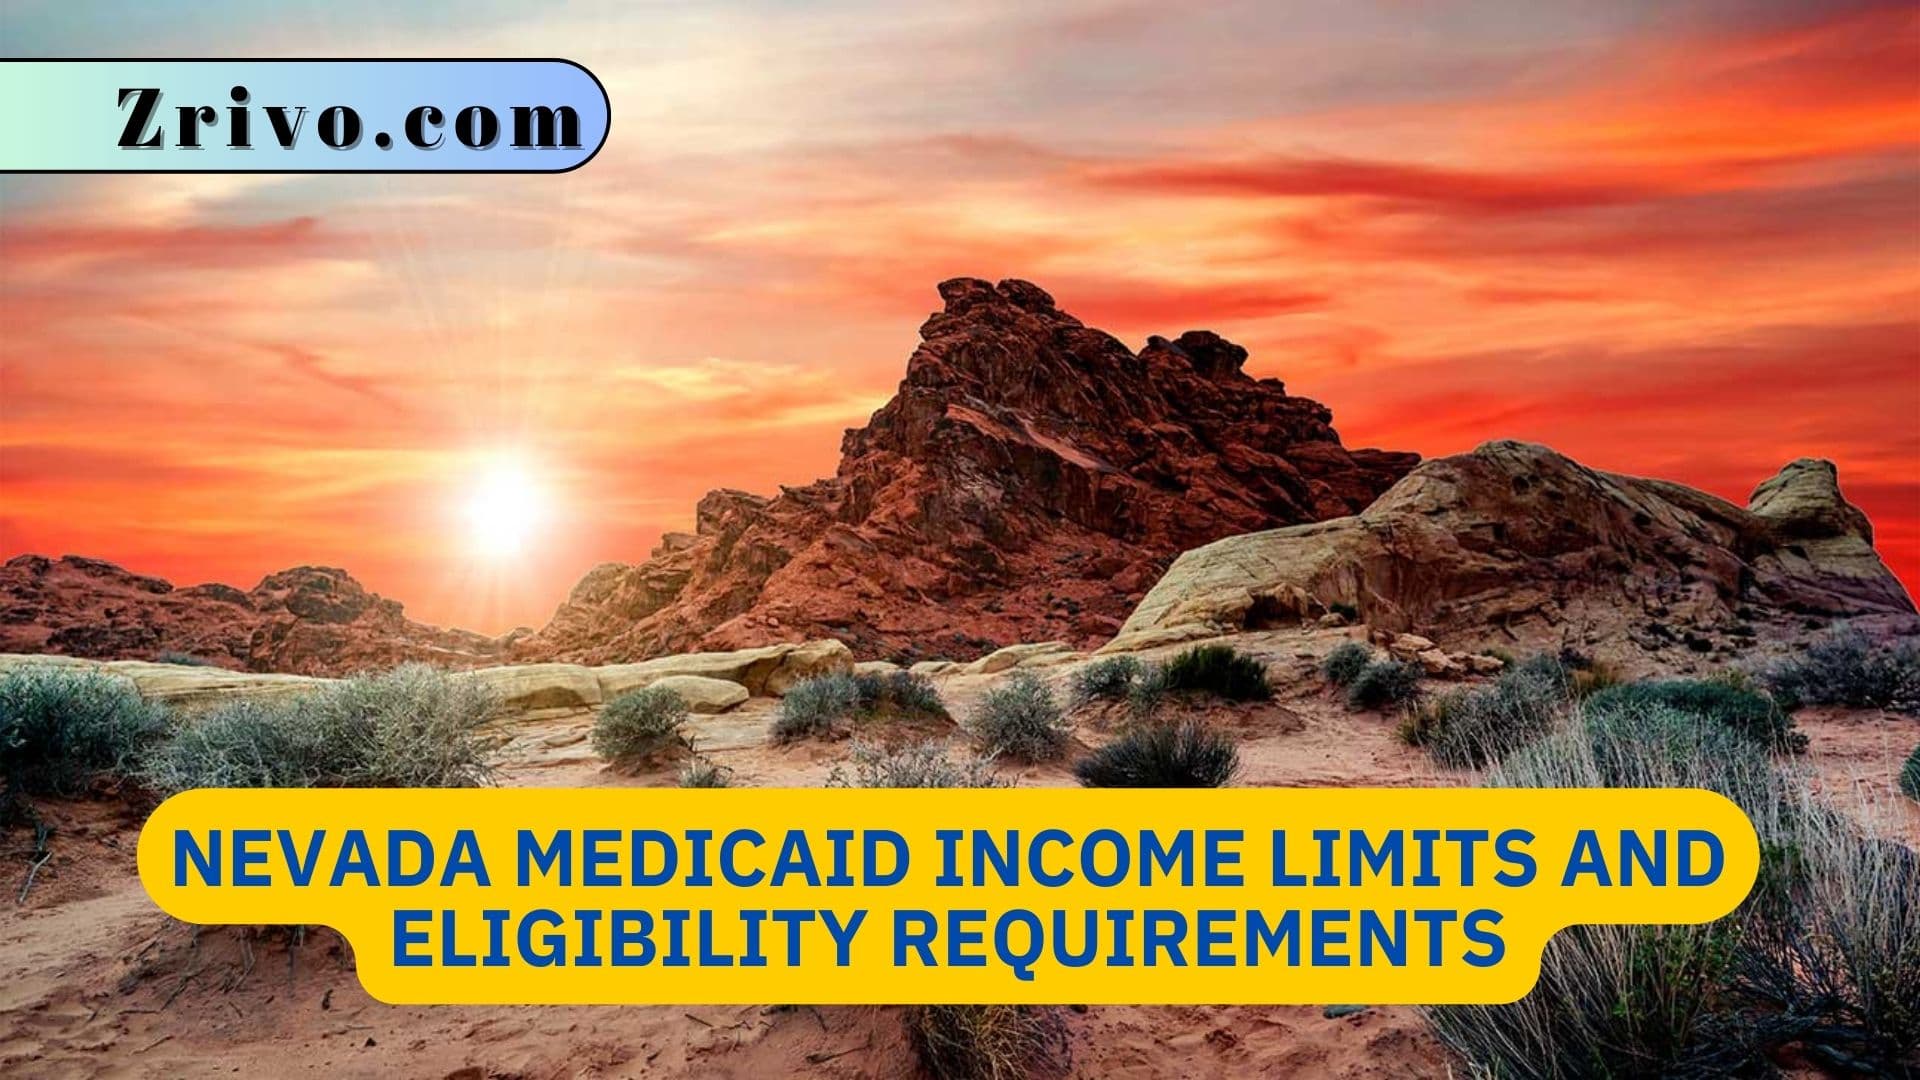 Nevada Medicaid Income Limits and Eligibility Requirements